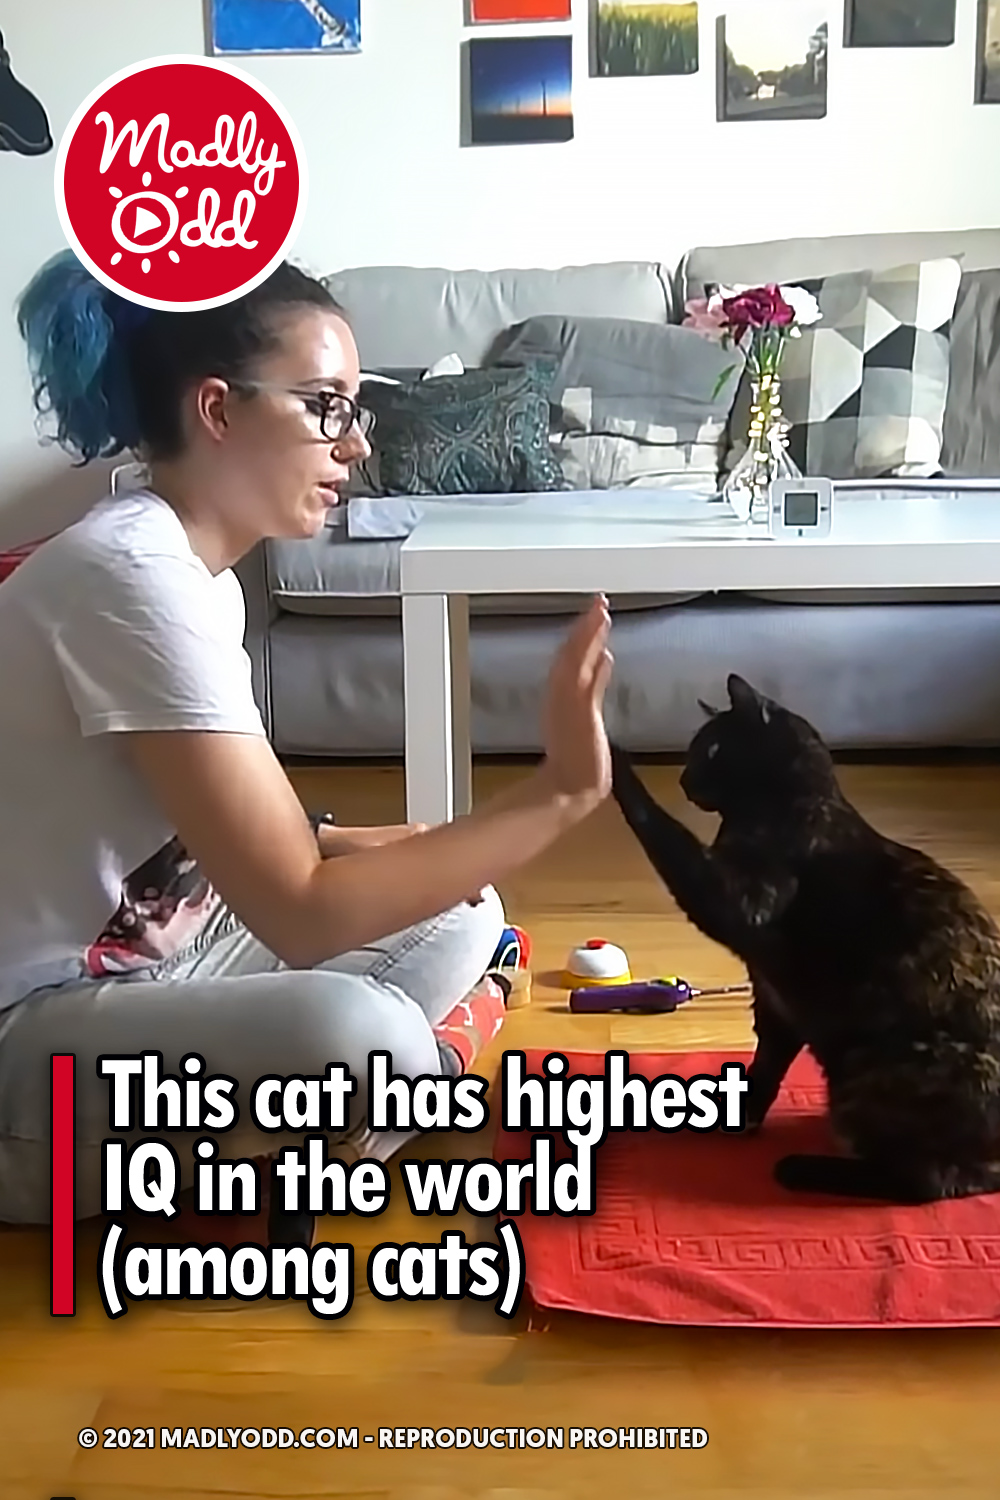 This cat has highest IQ in the world (among cats)